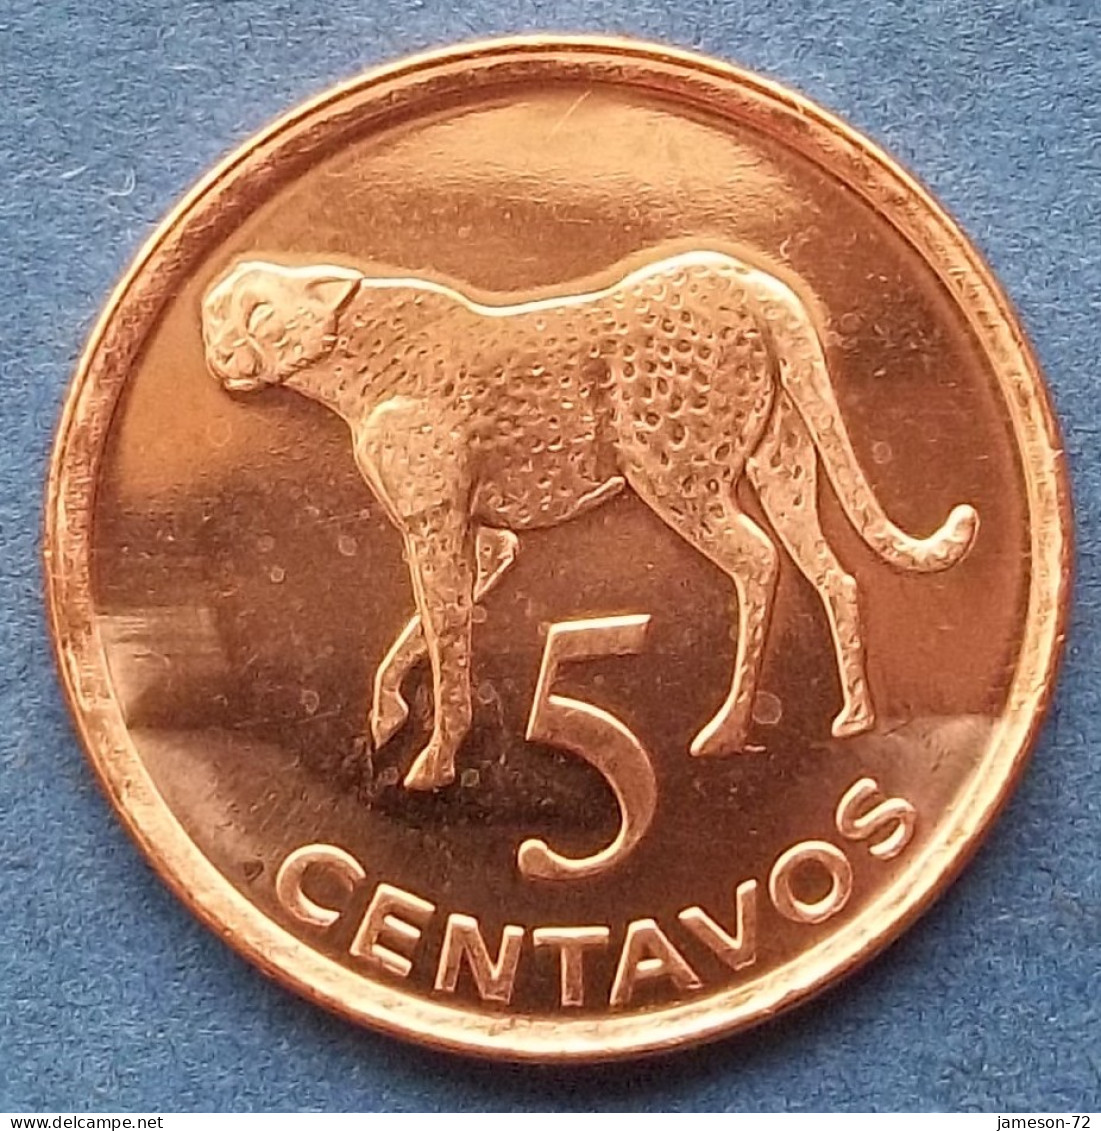 MOZAMBIQUE - 5 Centavos 2006 "Cheetah" KM# 133 Peoples Republic Reform Coinage (2006) - Edelweiss Coins - Mozambique